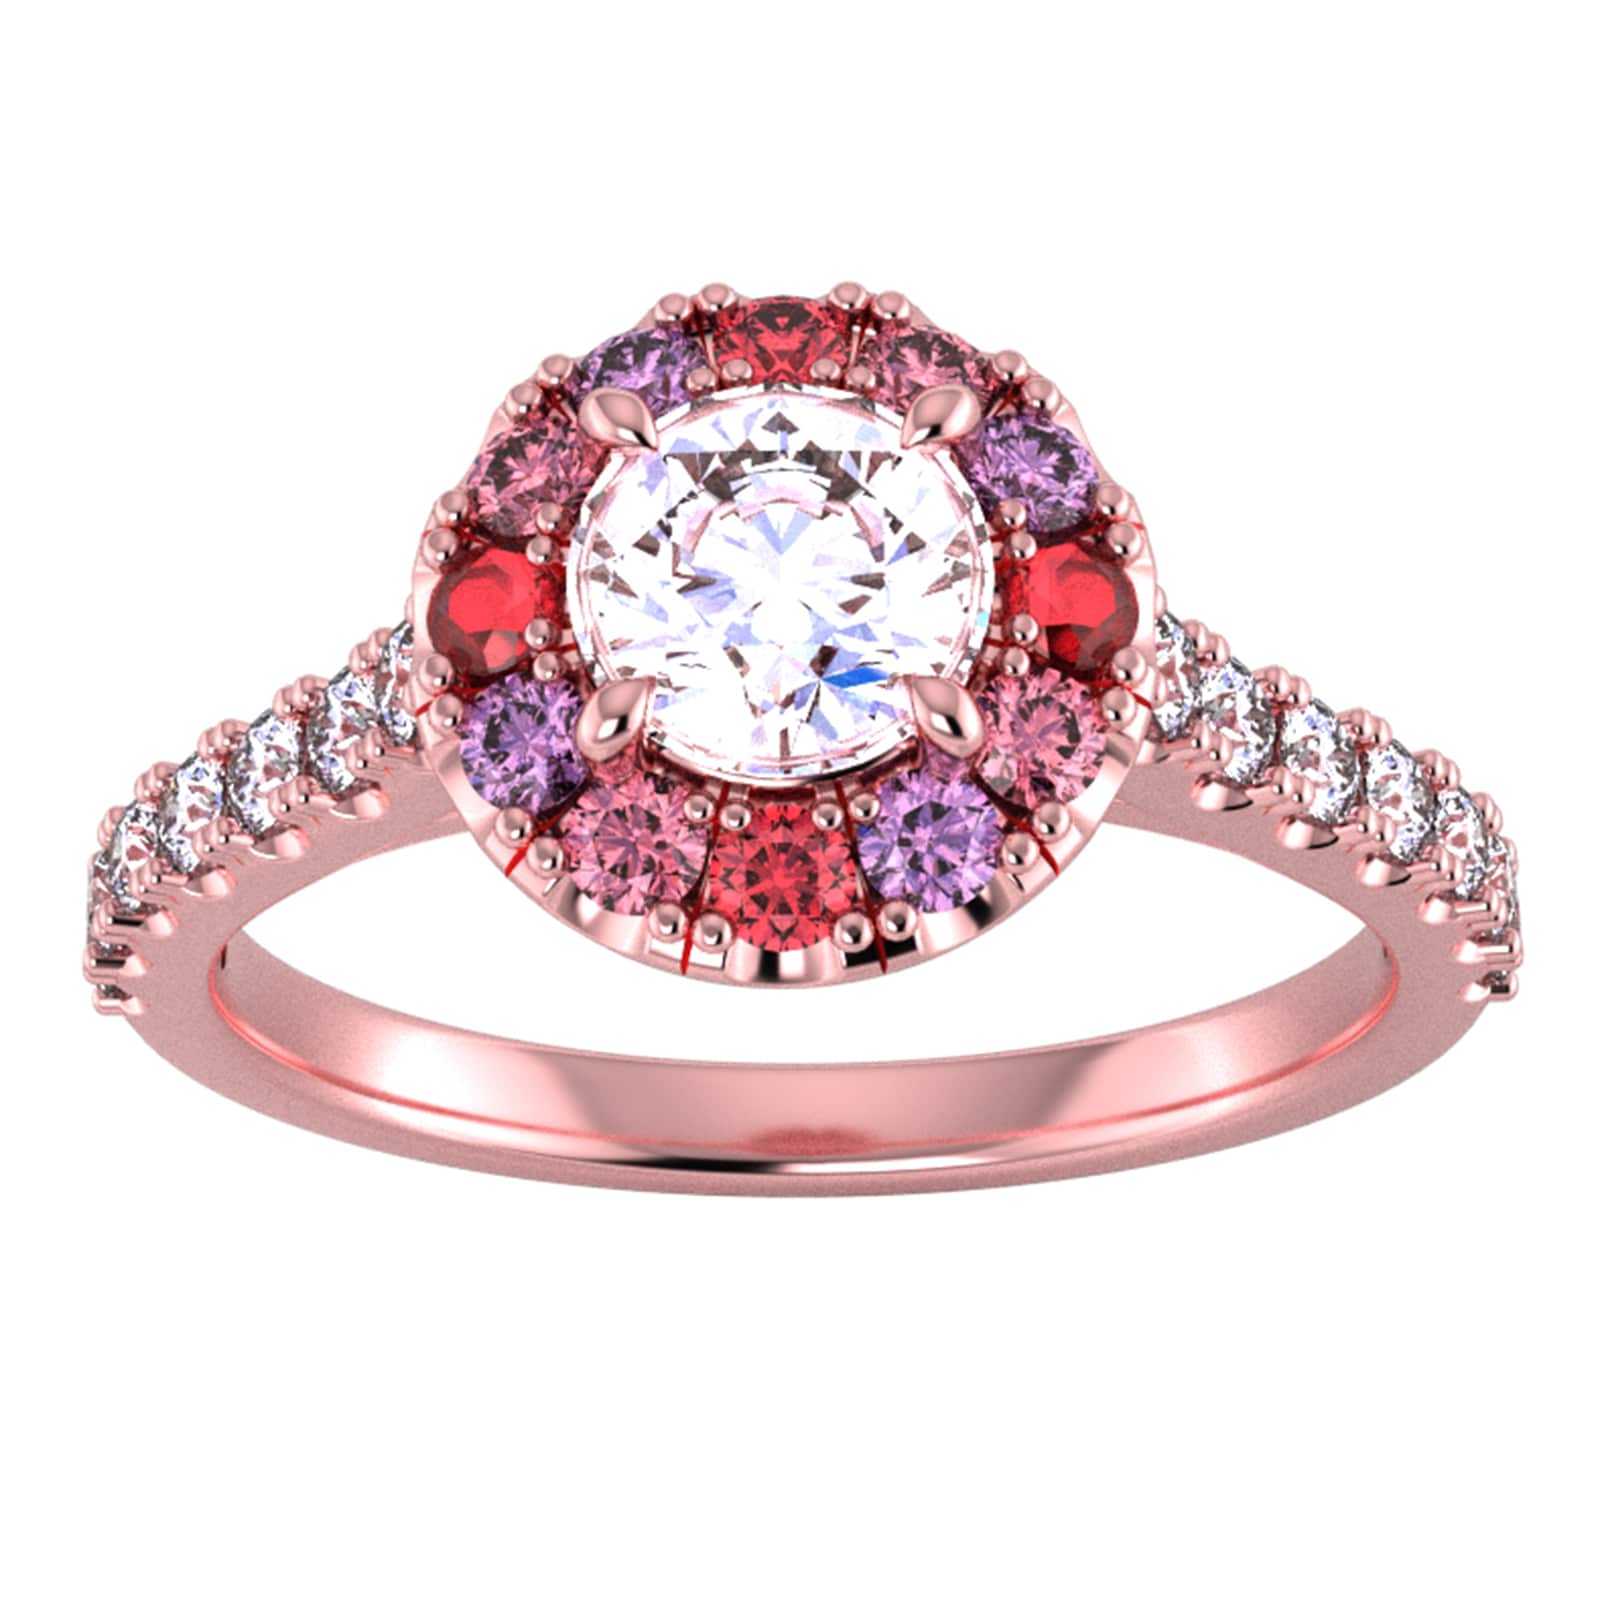 18ct Rose Gold Diamond & Pink, Red, Purple Sapphire Halo Ring - Ring Size K.5